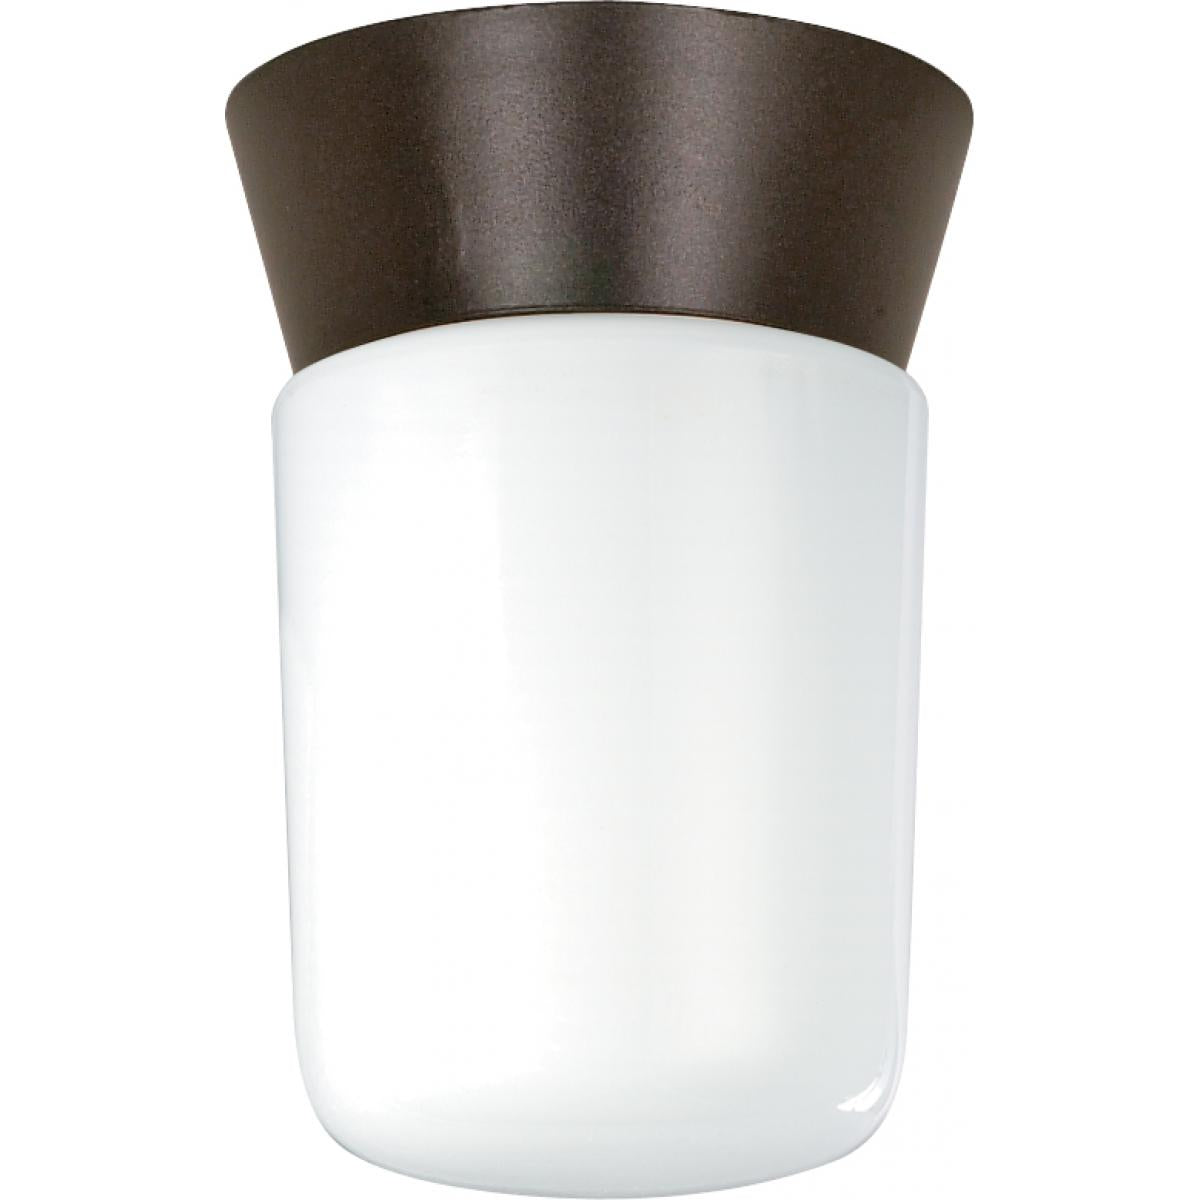 Satco 77-156 1 Light - 8" - Utility Ceiling Mount - With White Glass Cylinder - Bronzotic Finish